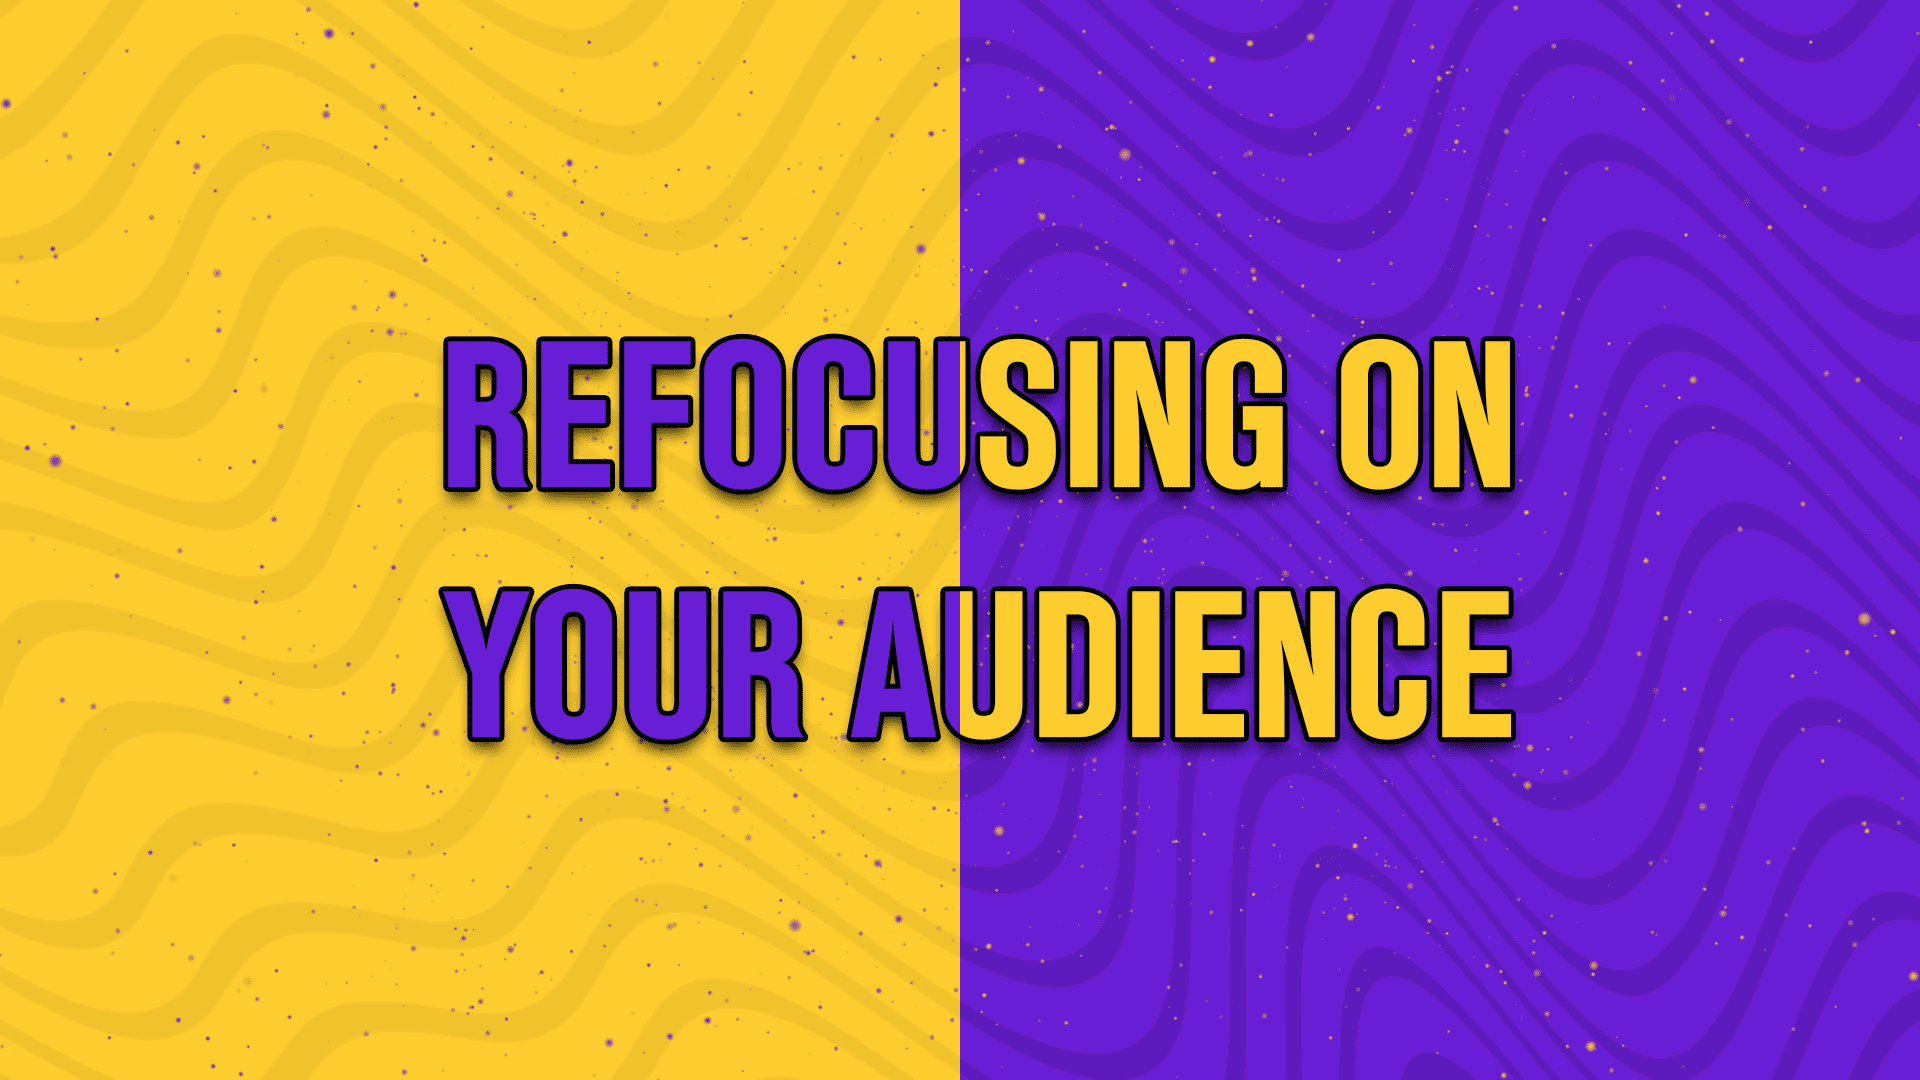 Refocusing on your audience - StreamBee